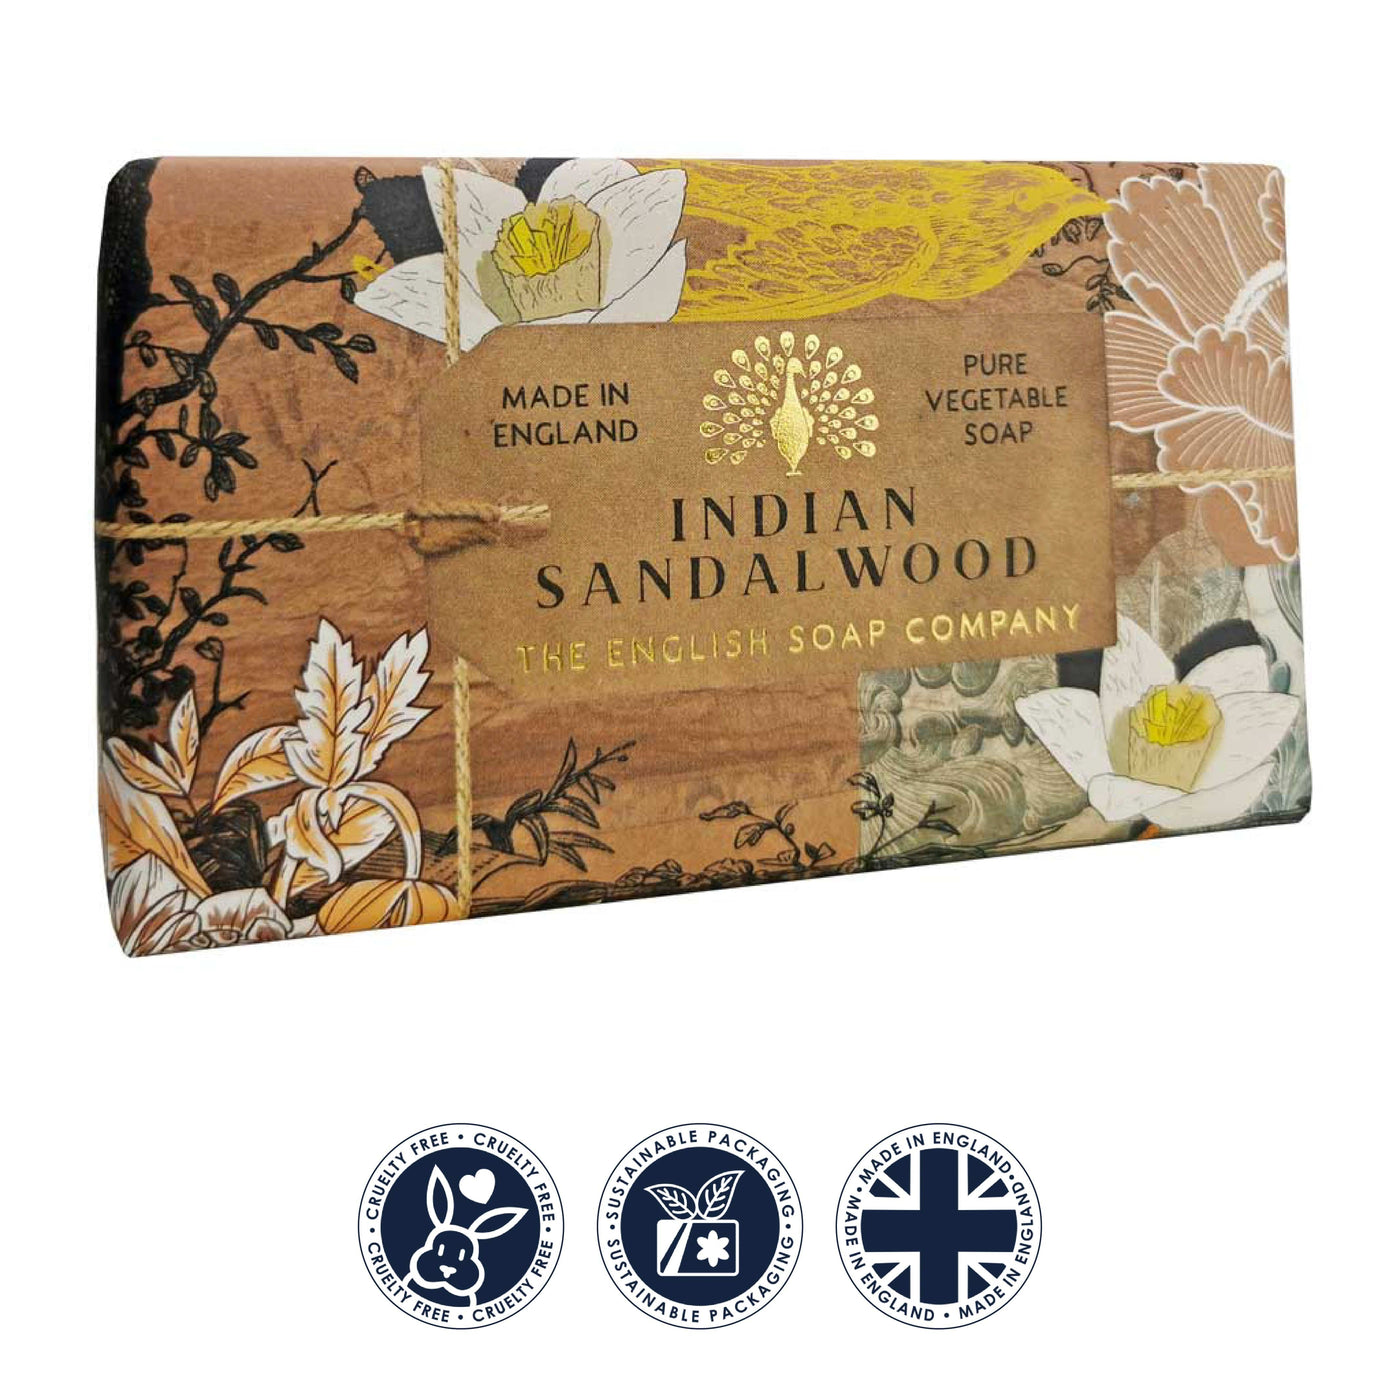 Anniversary Indian Sandalwood Soap Bar from our Luxury Bar Soap collection by The English Soap Company